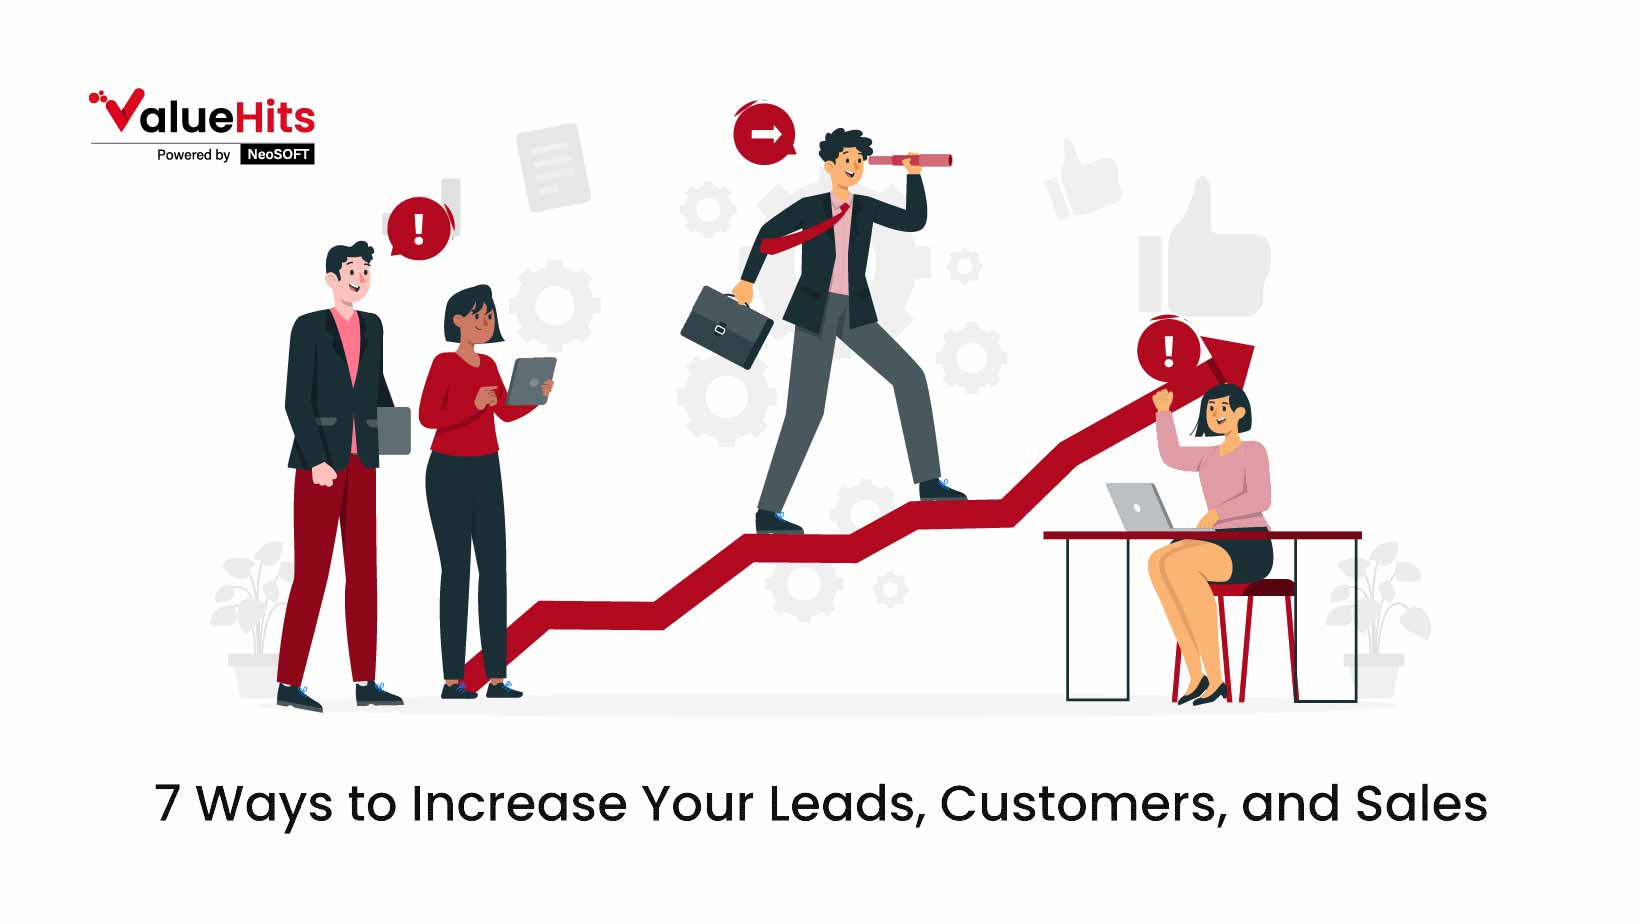 7 Ways to Increase Your Leads, Customers, and Sales